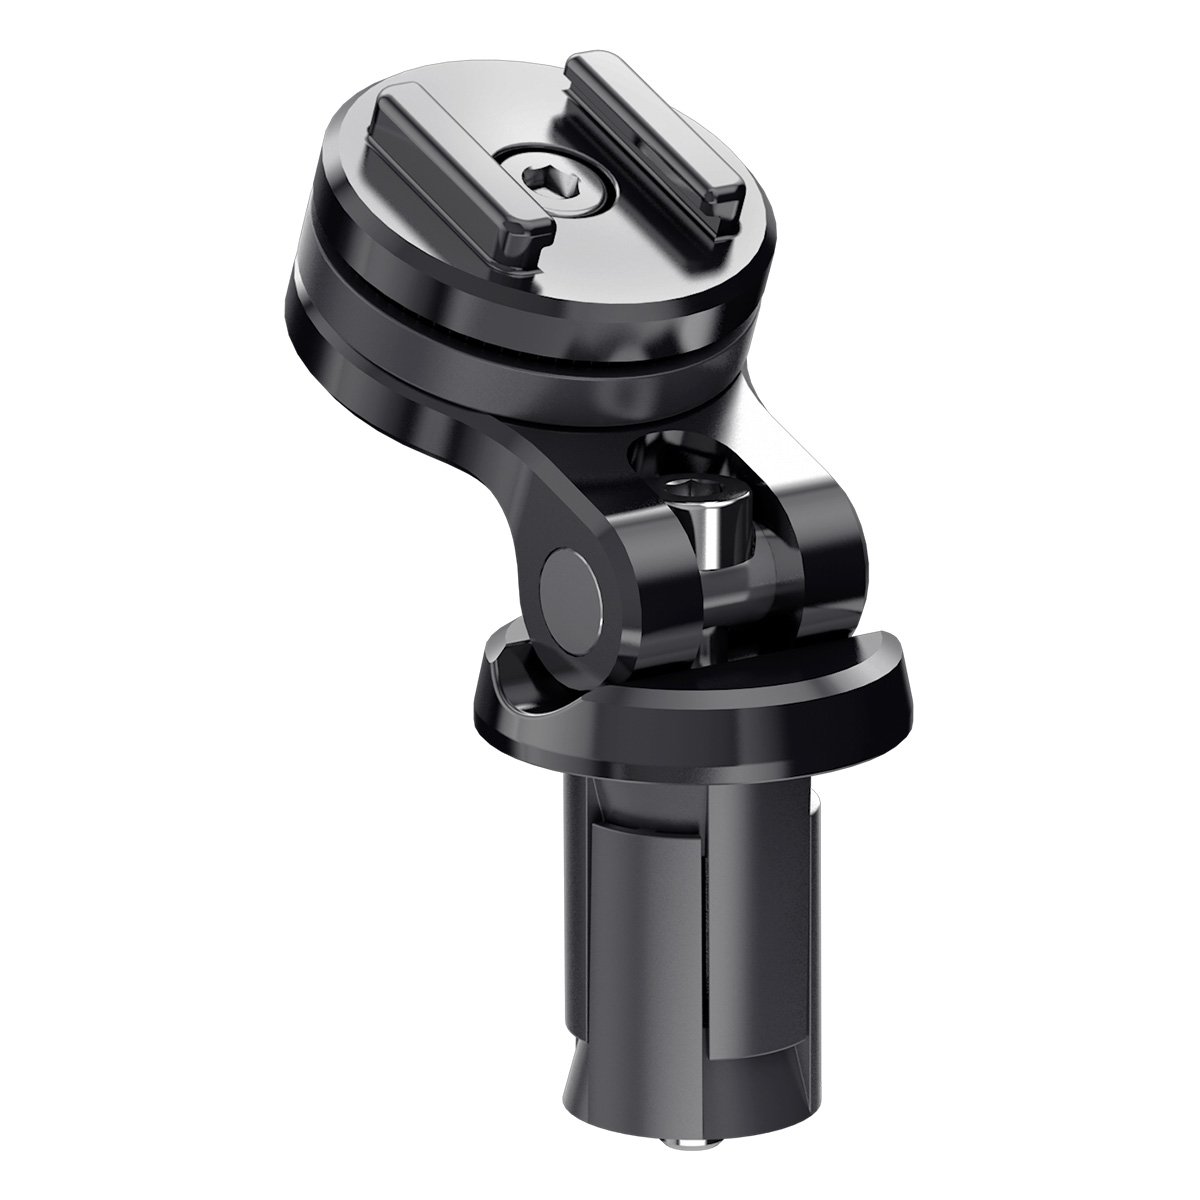 Image of SP Connect SP Moto Stem Mount Size ID 4028017532143